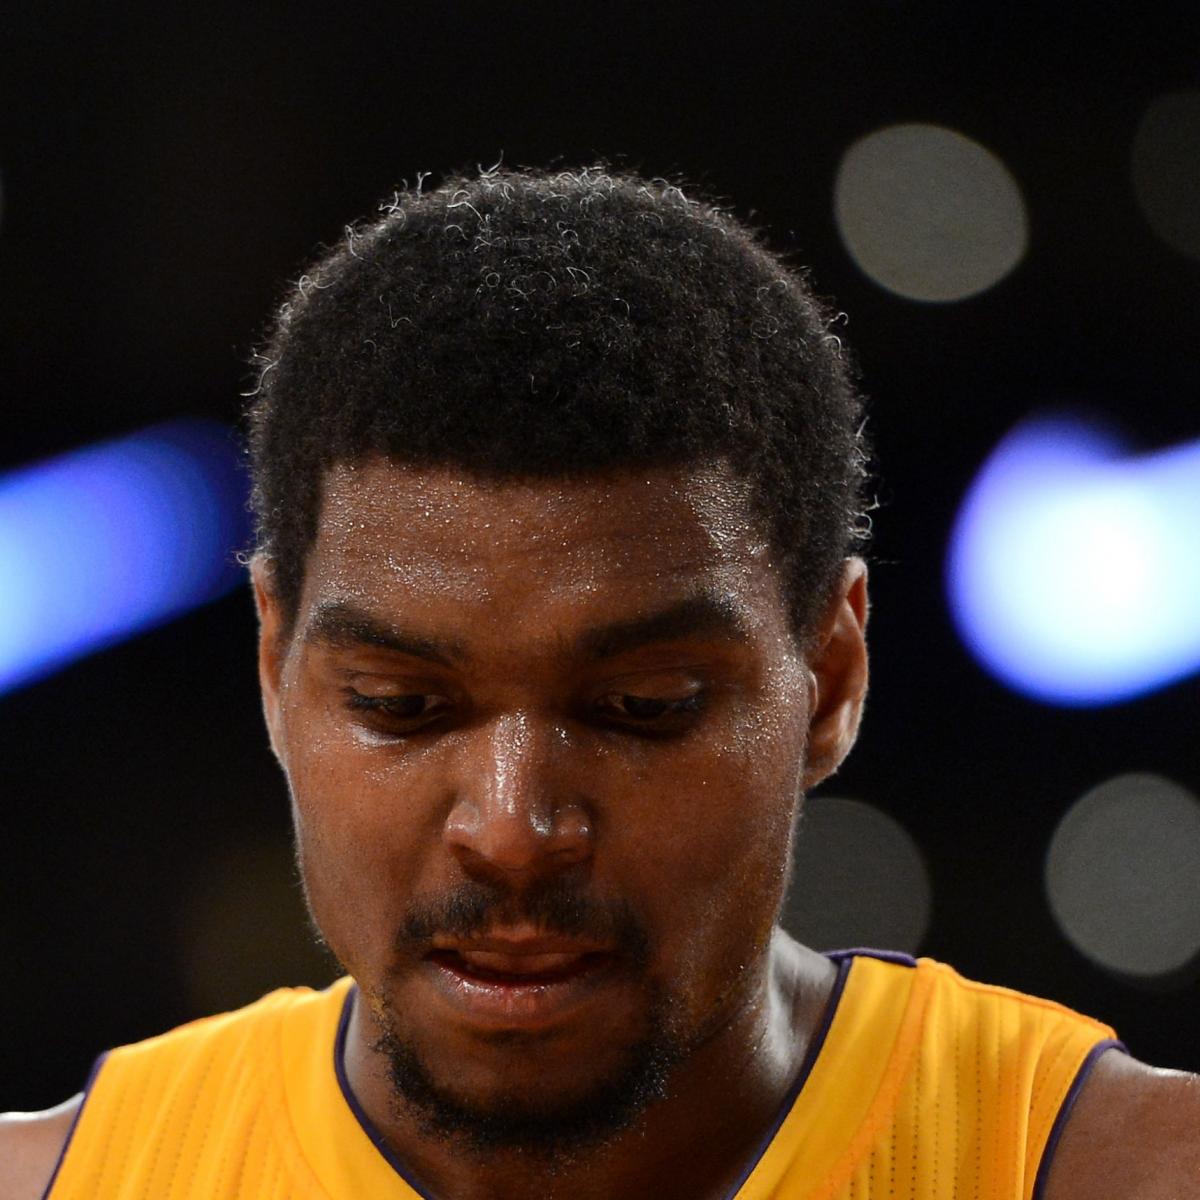 Los Angeles Lakers Andrew Bynum's Future with the Lakers Is Up in the